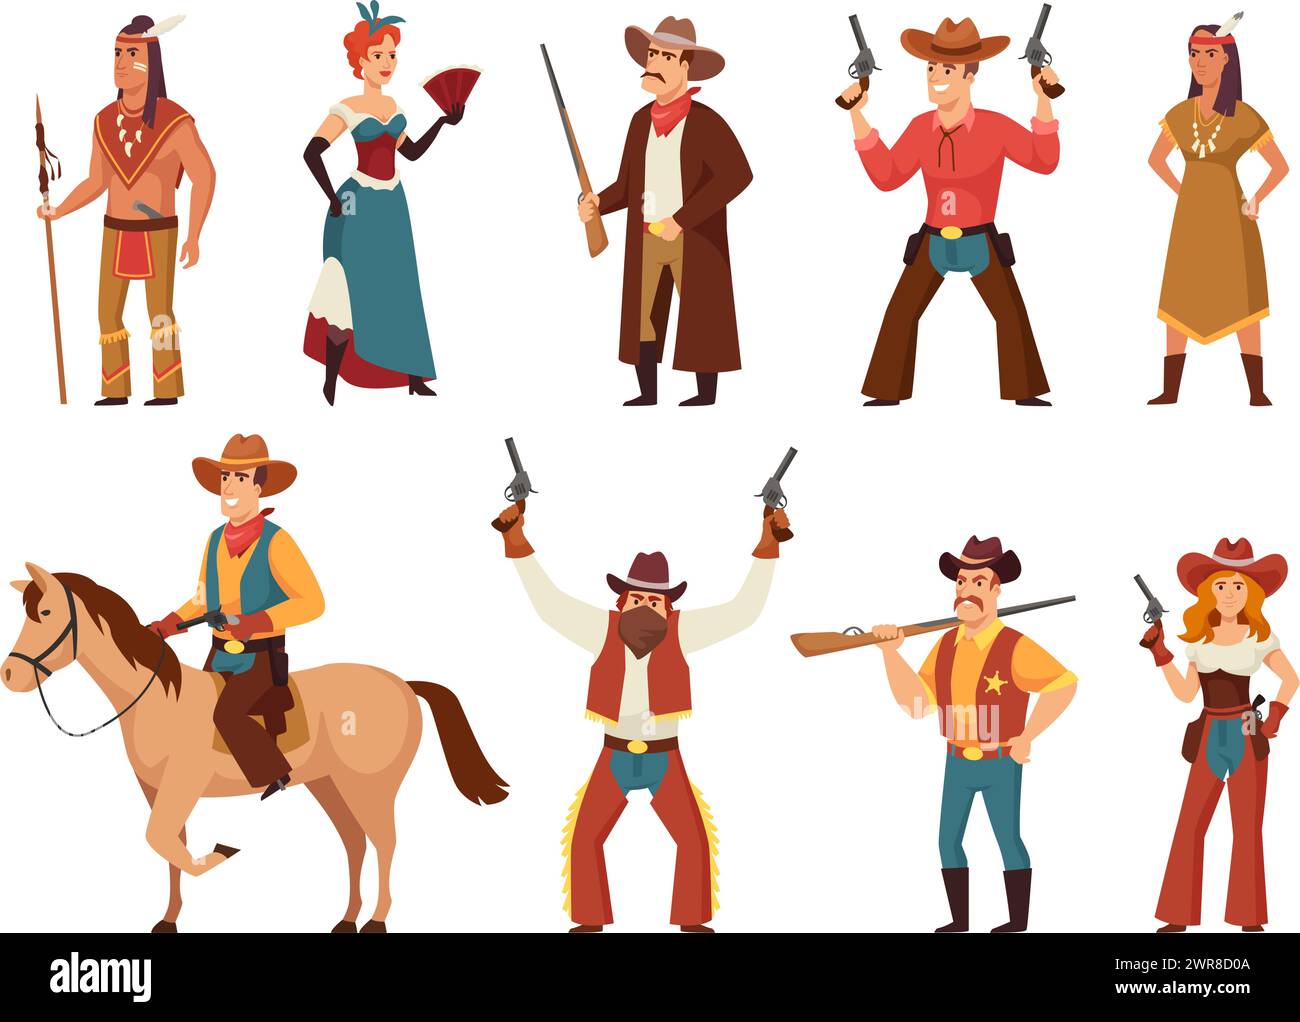 Cartoon wild west characters. Classic western cowboy and cowgirl, native american warrior, saloon dancer and sheriff vector illustration set Stock Vector